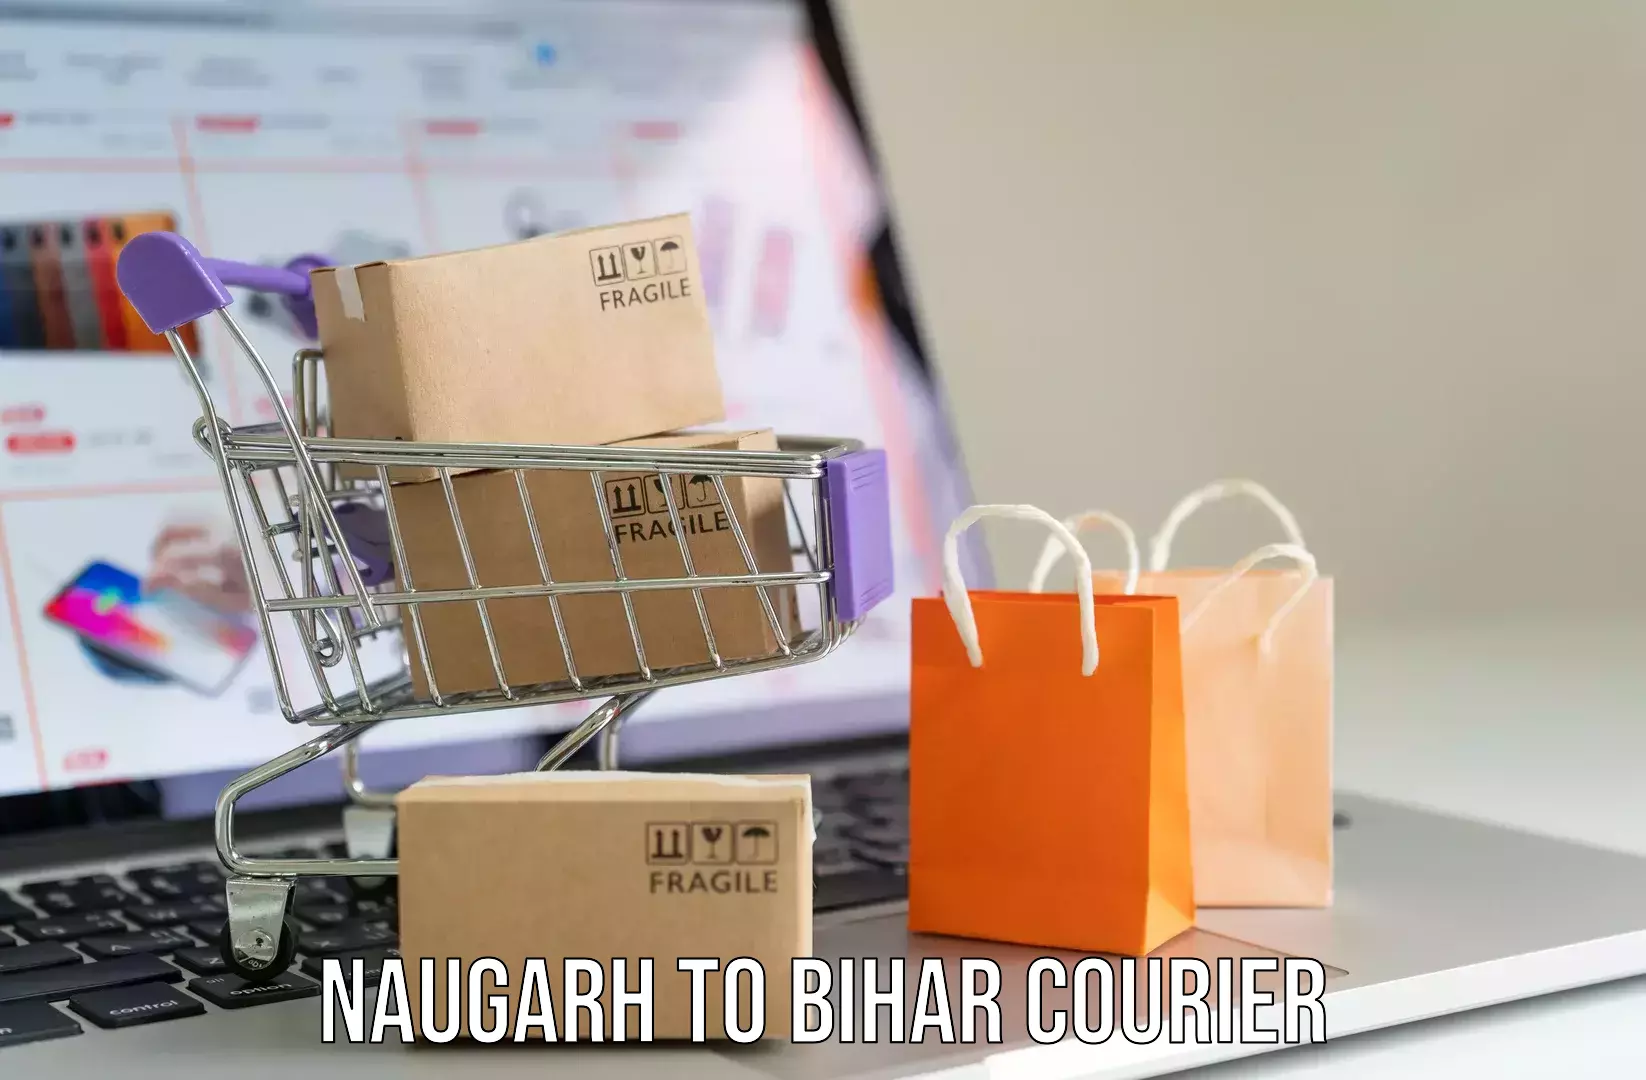 Luggage delivery app Naugarh to Bihar